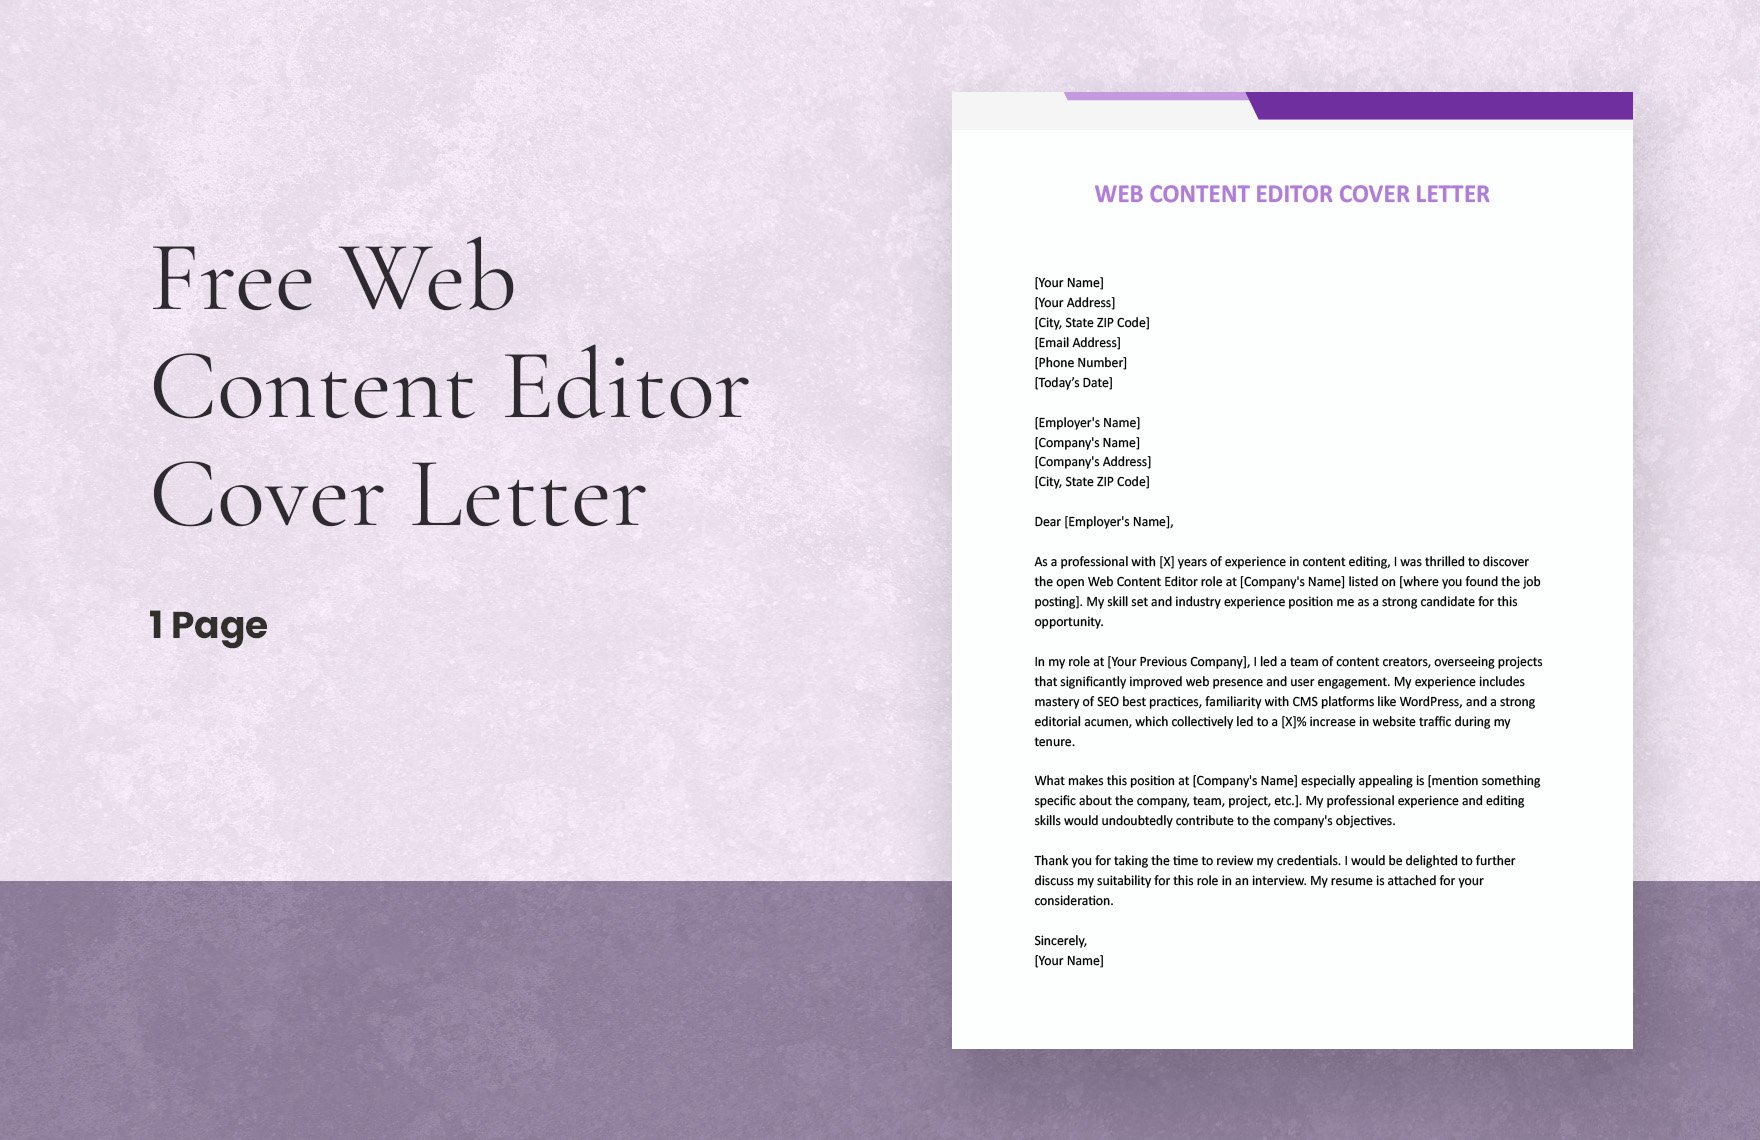 Web Content Editor Cover Letter in Word, Google Docs